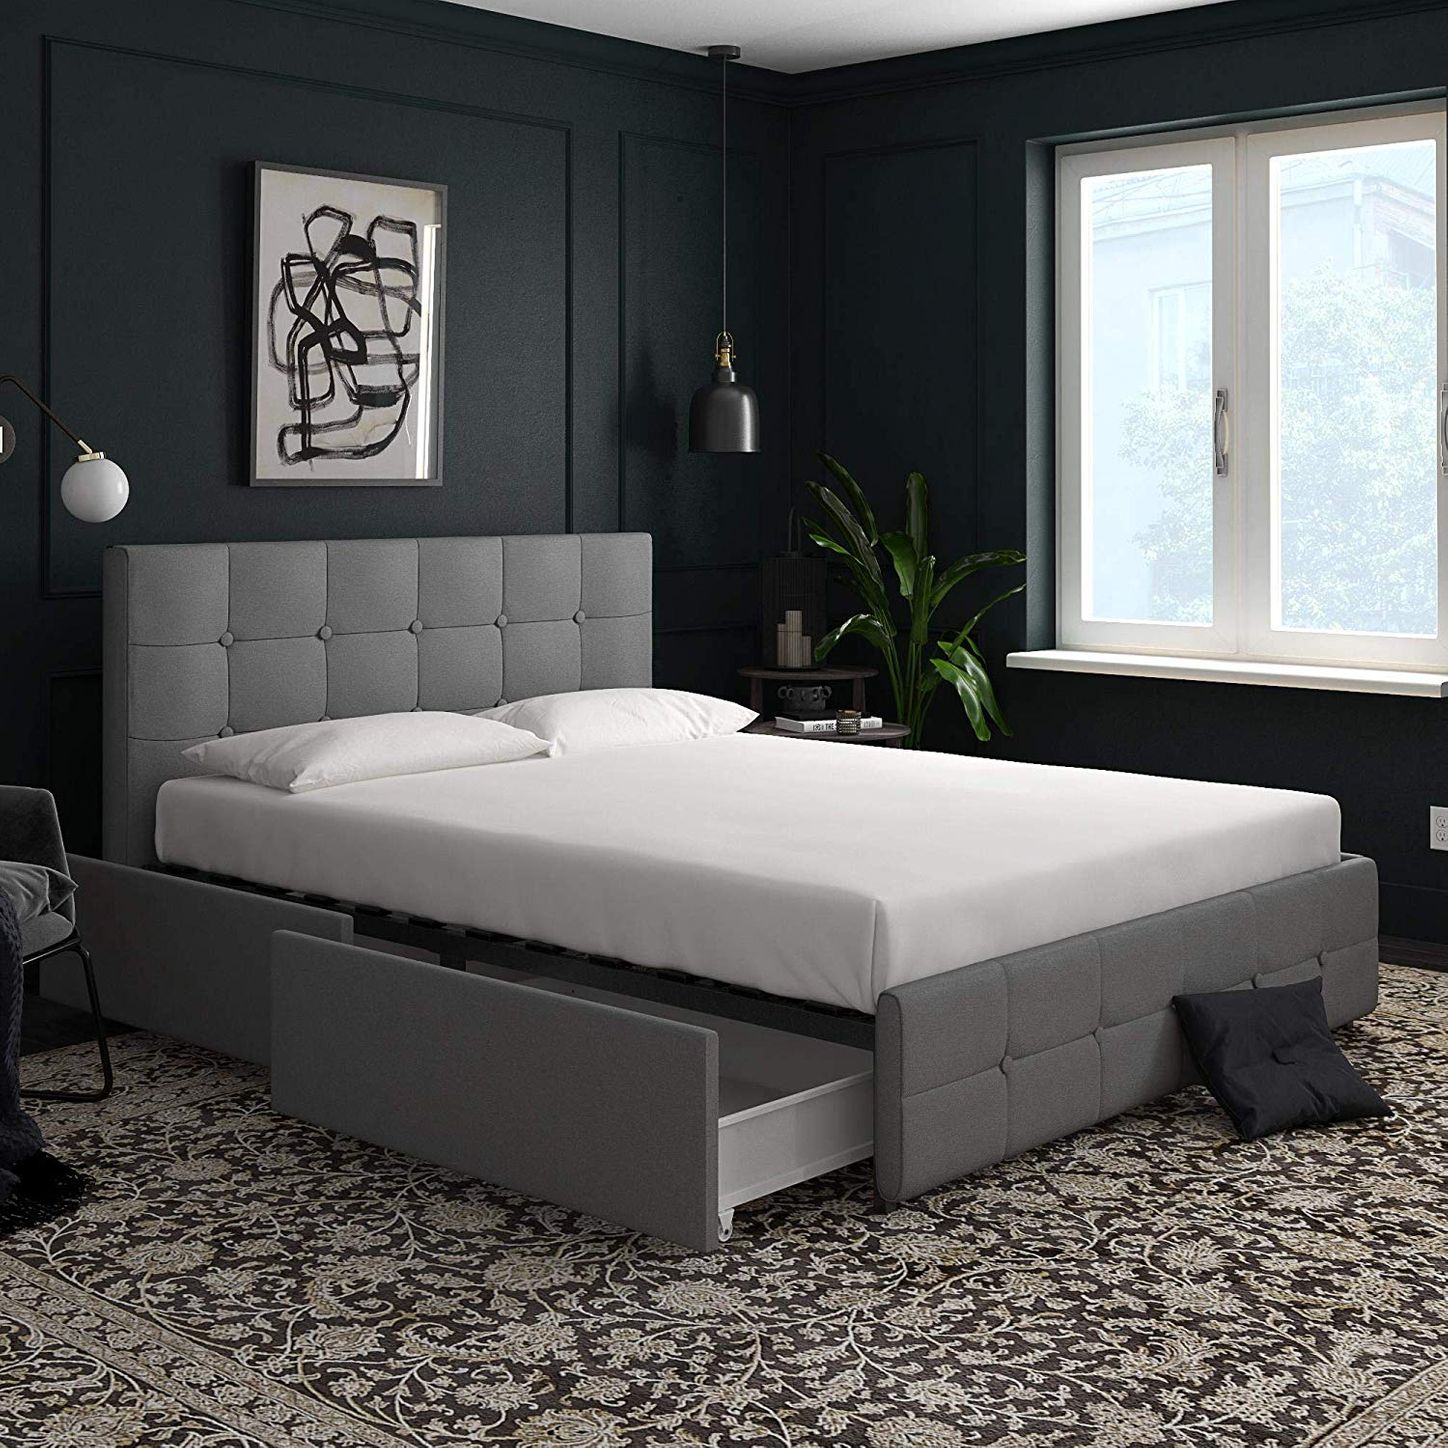 21 Best Platform Beds 2021 The Strategist, What Is A Bed With Storage Called